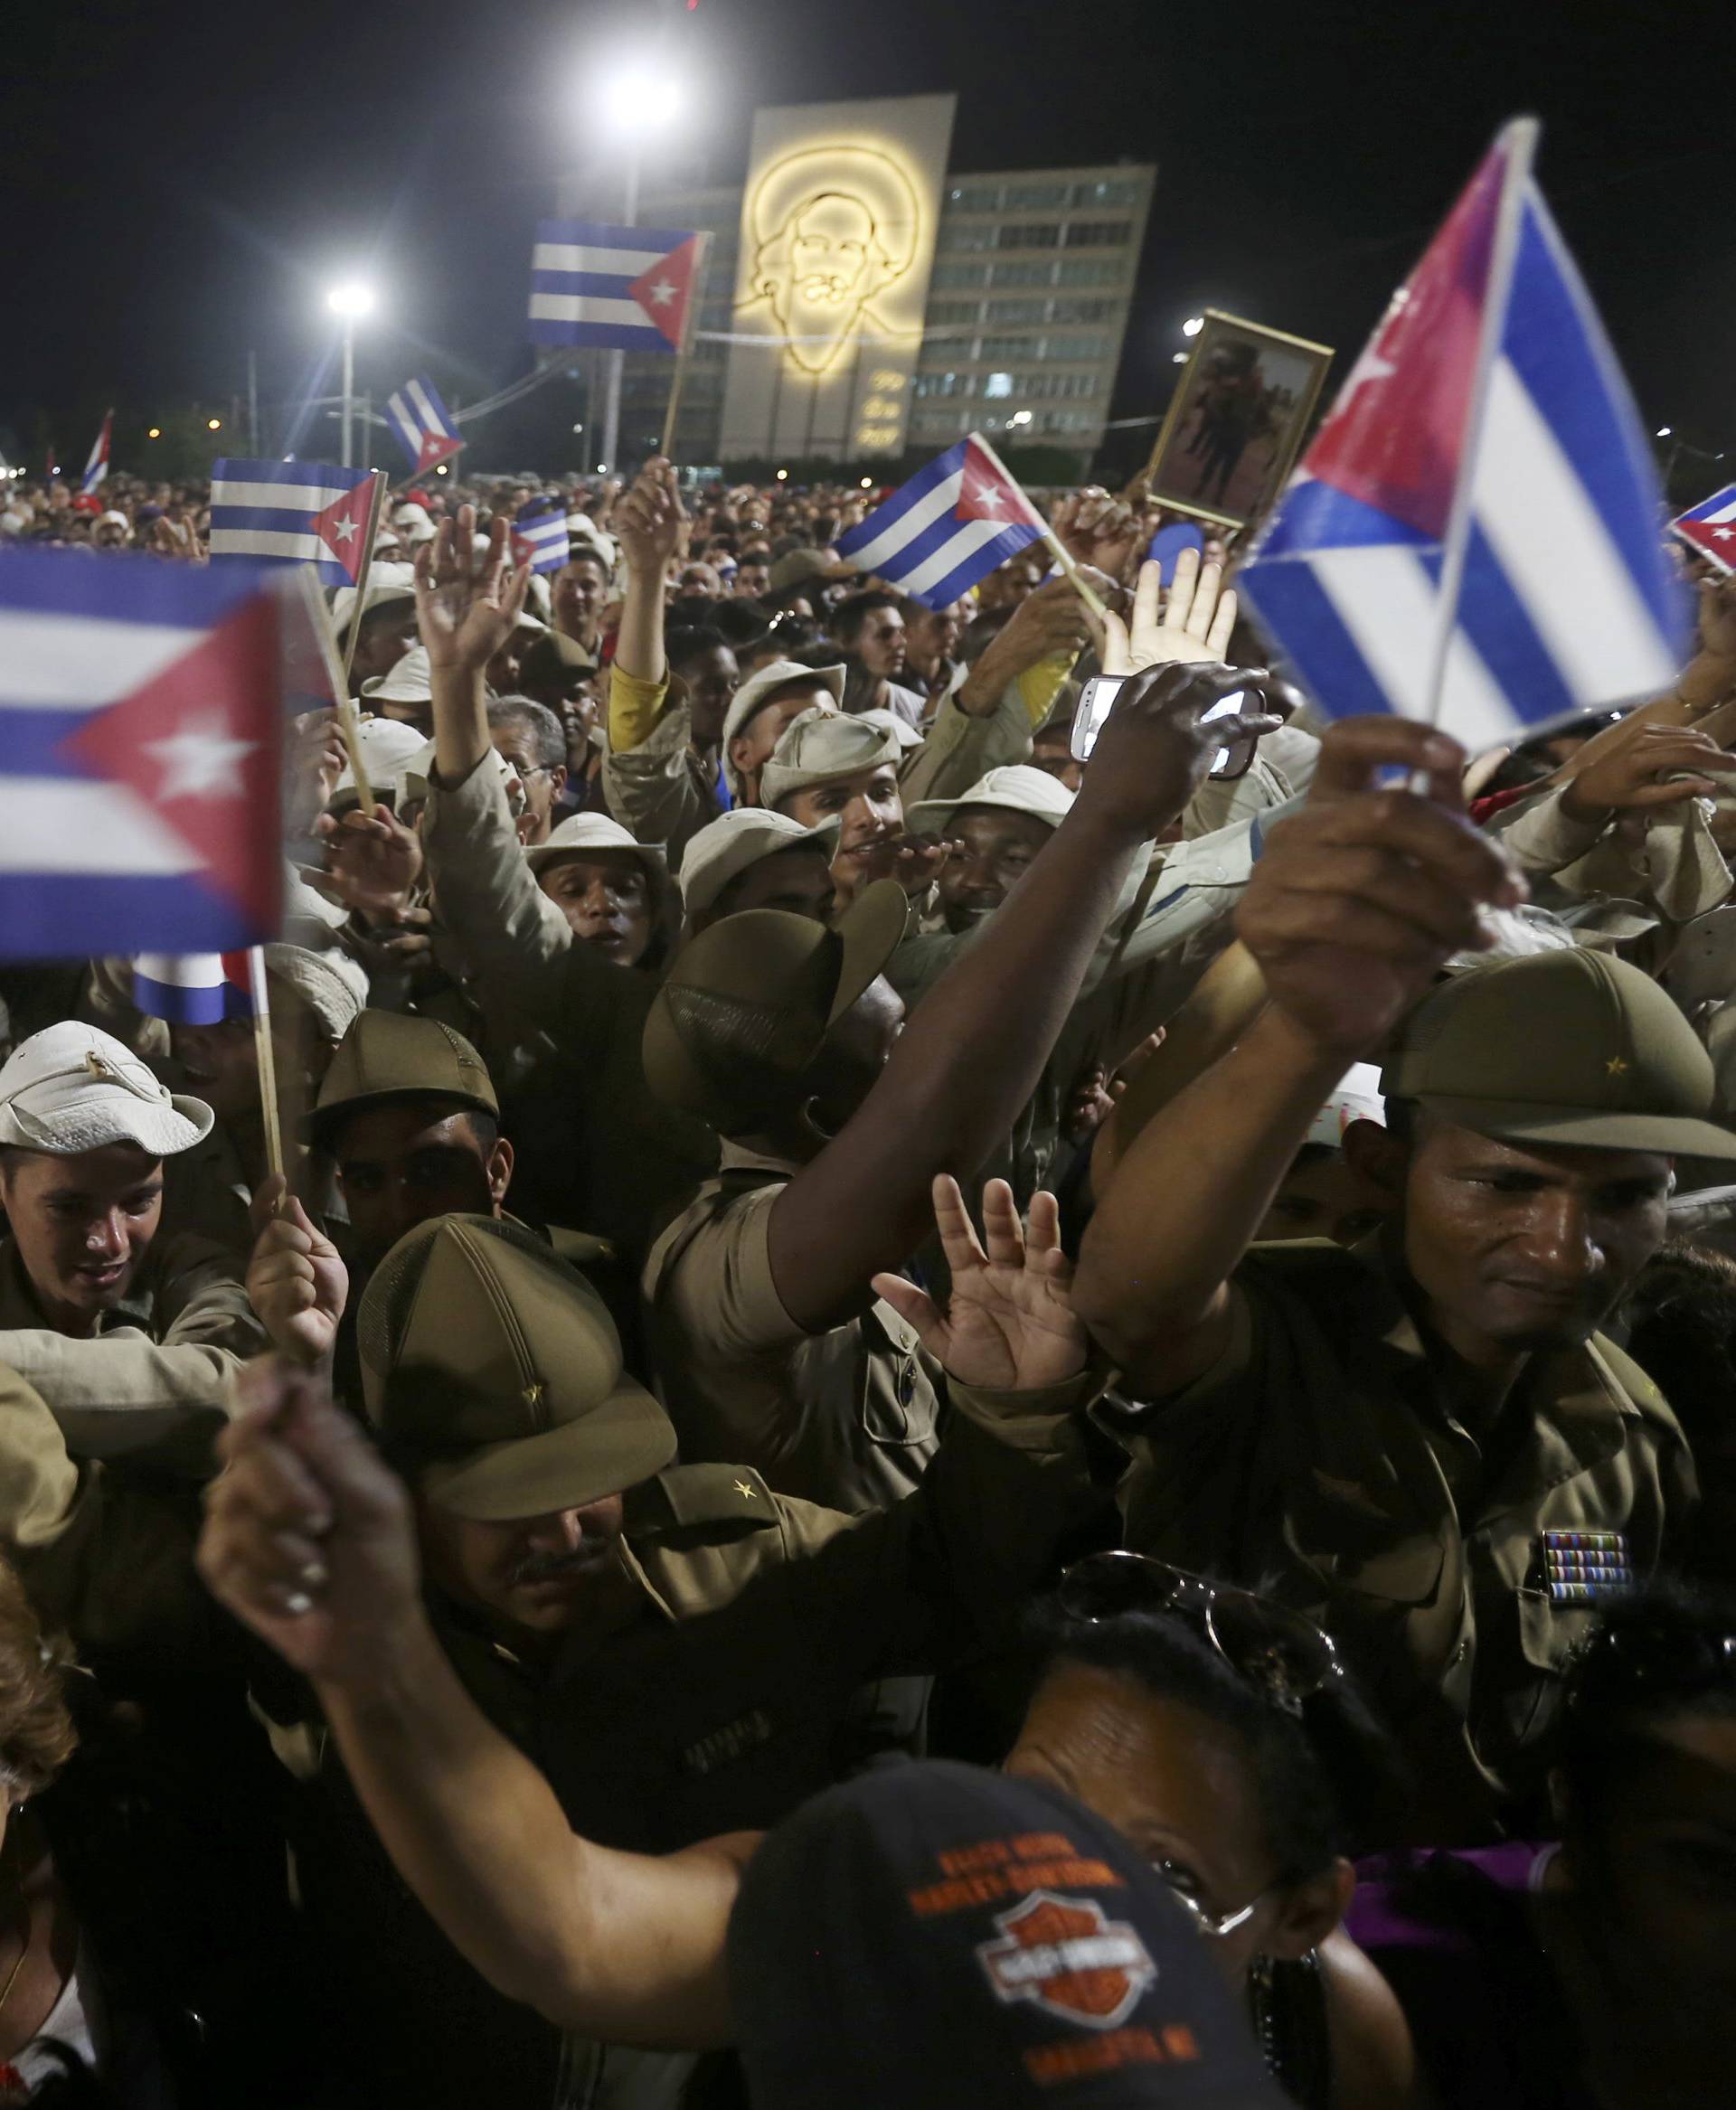 People wave Cuban flags as they attend a massive tribute to Cuba's late President Fidel Castro in Revolution Square in Havana